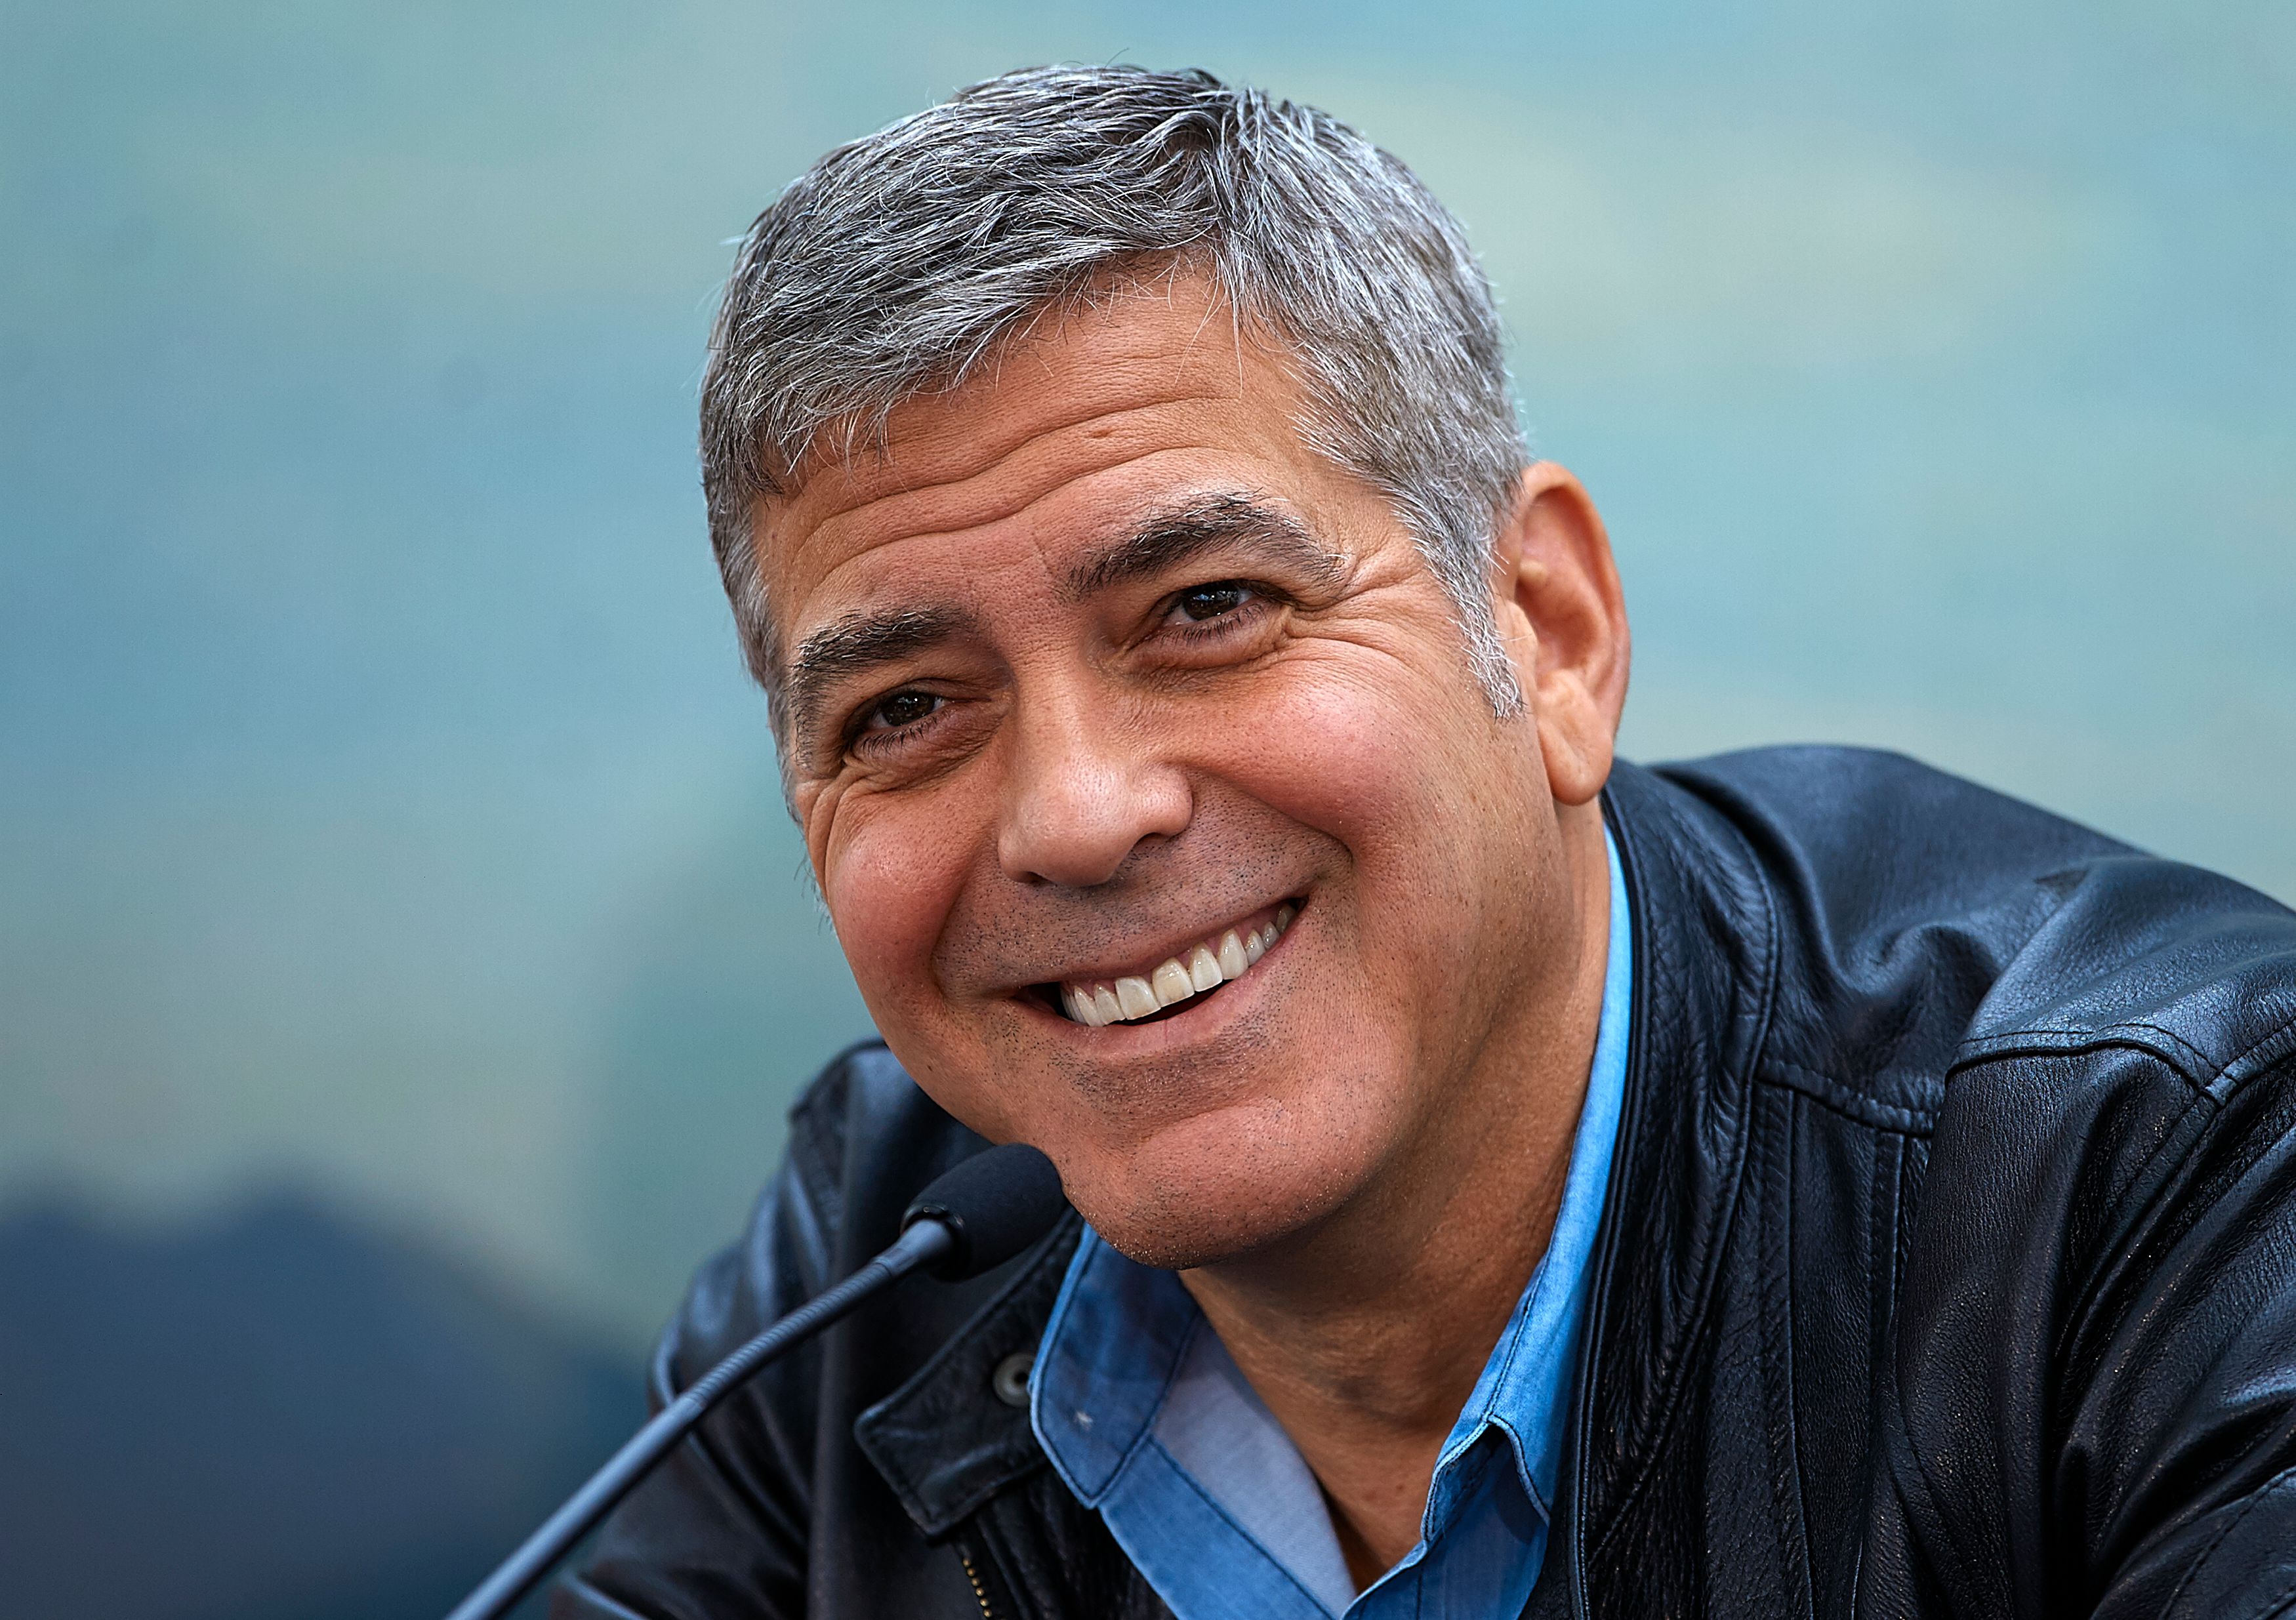 George Clooney at at the 'Tomorrowland' Press Conference at the L'Hemisferic on May 19, 2015. | Photo: Getty Images